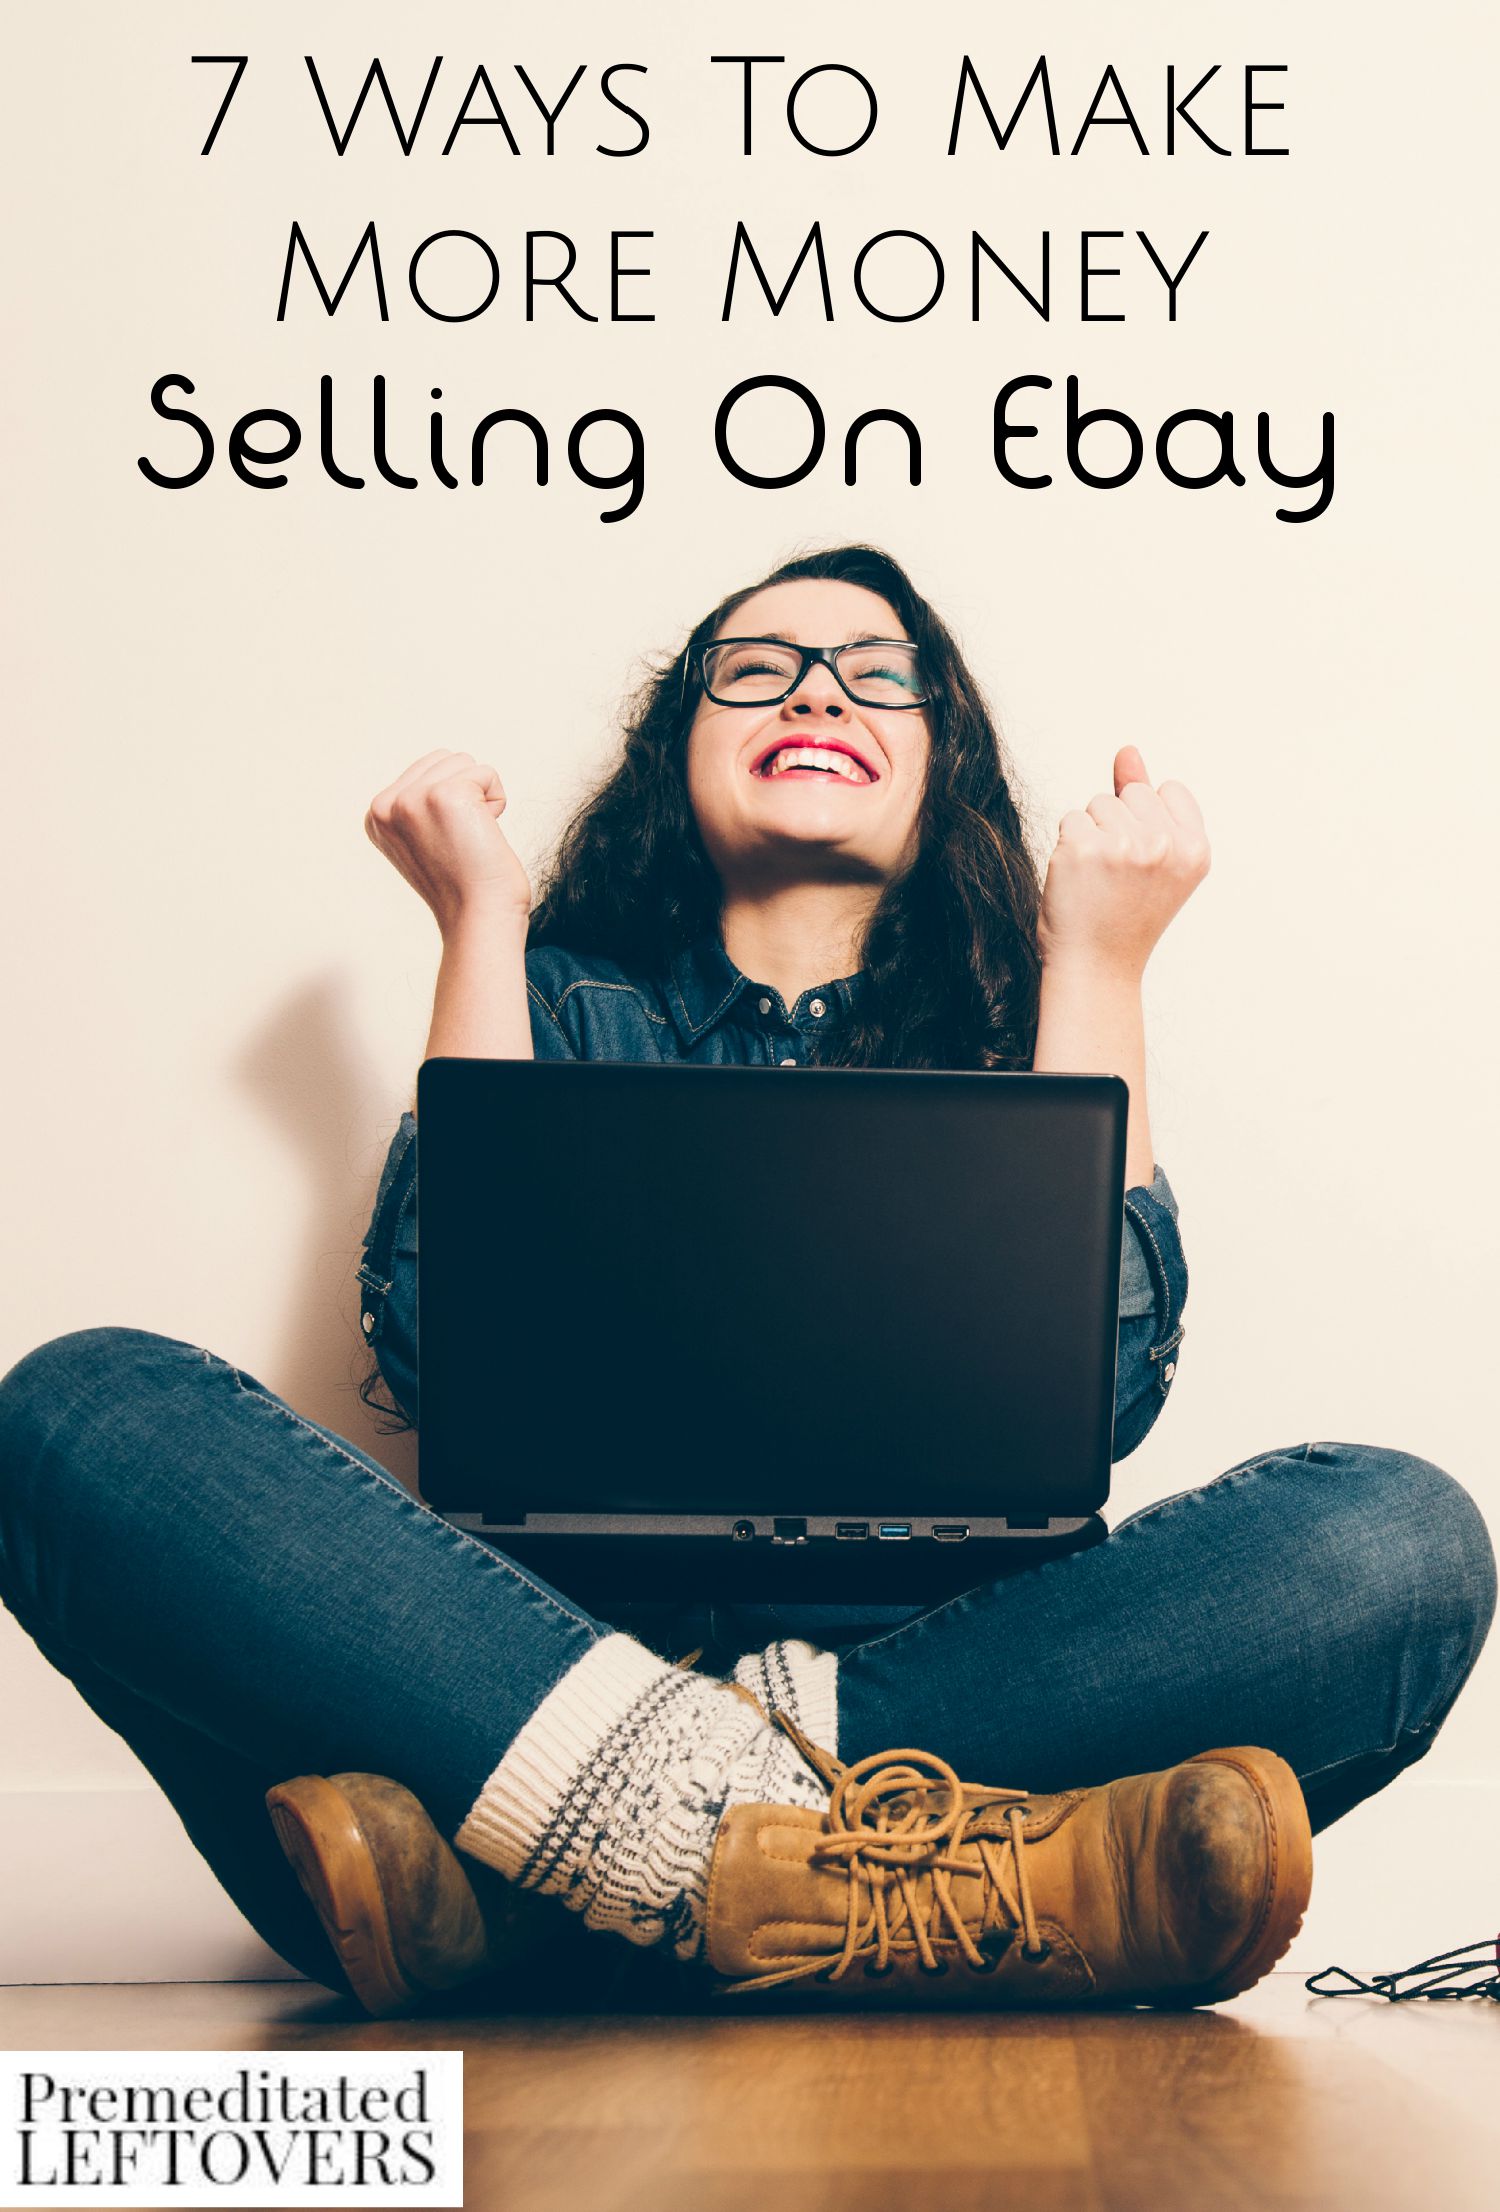 7 Ways to Make More Money Selling on Ebay- Learn the best ways to market your items and maximize your income with these helpful tips for selling on Ebay. 